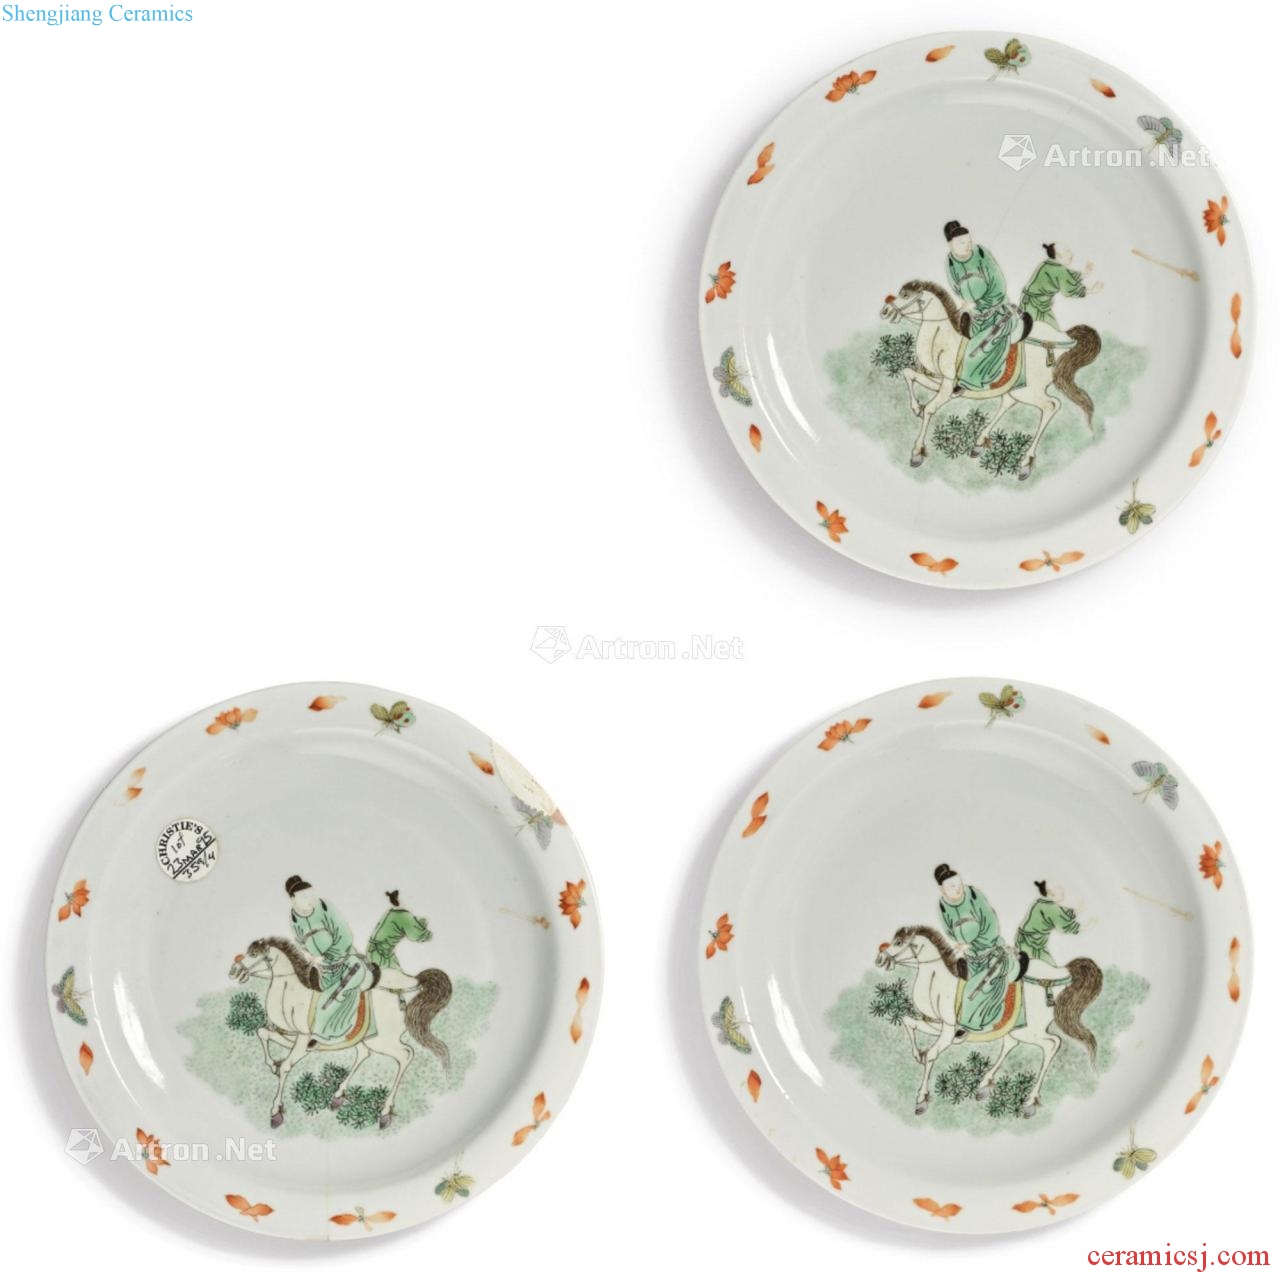 Stories of the qing emperor kangxi colorful figure plate (3)